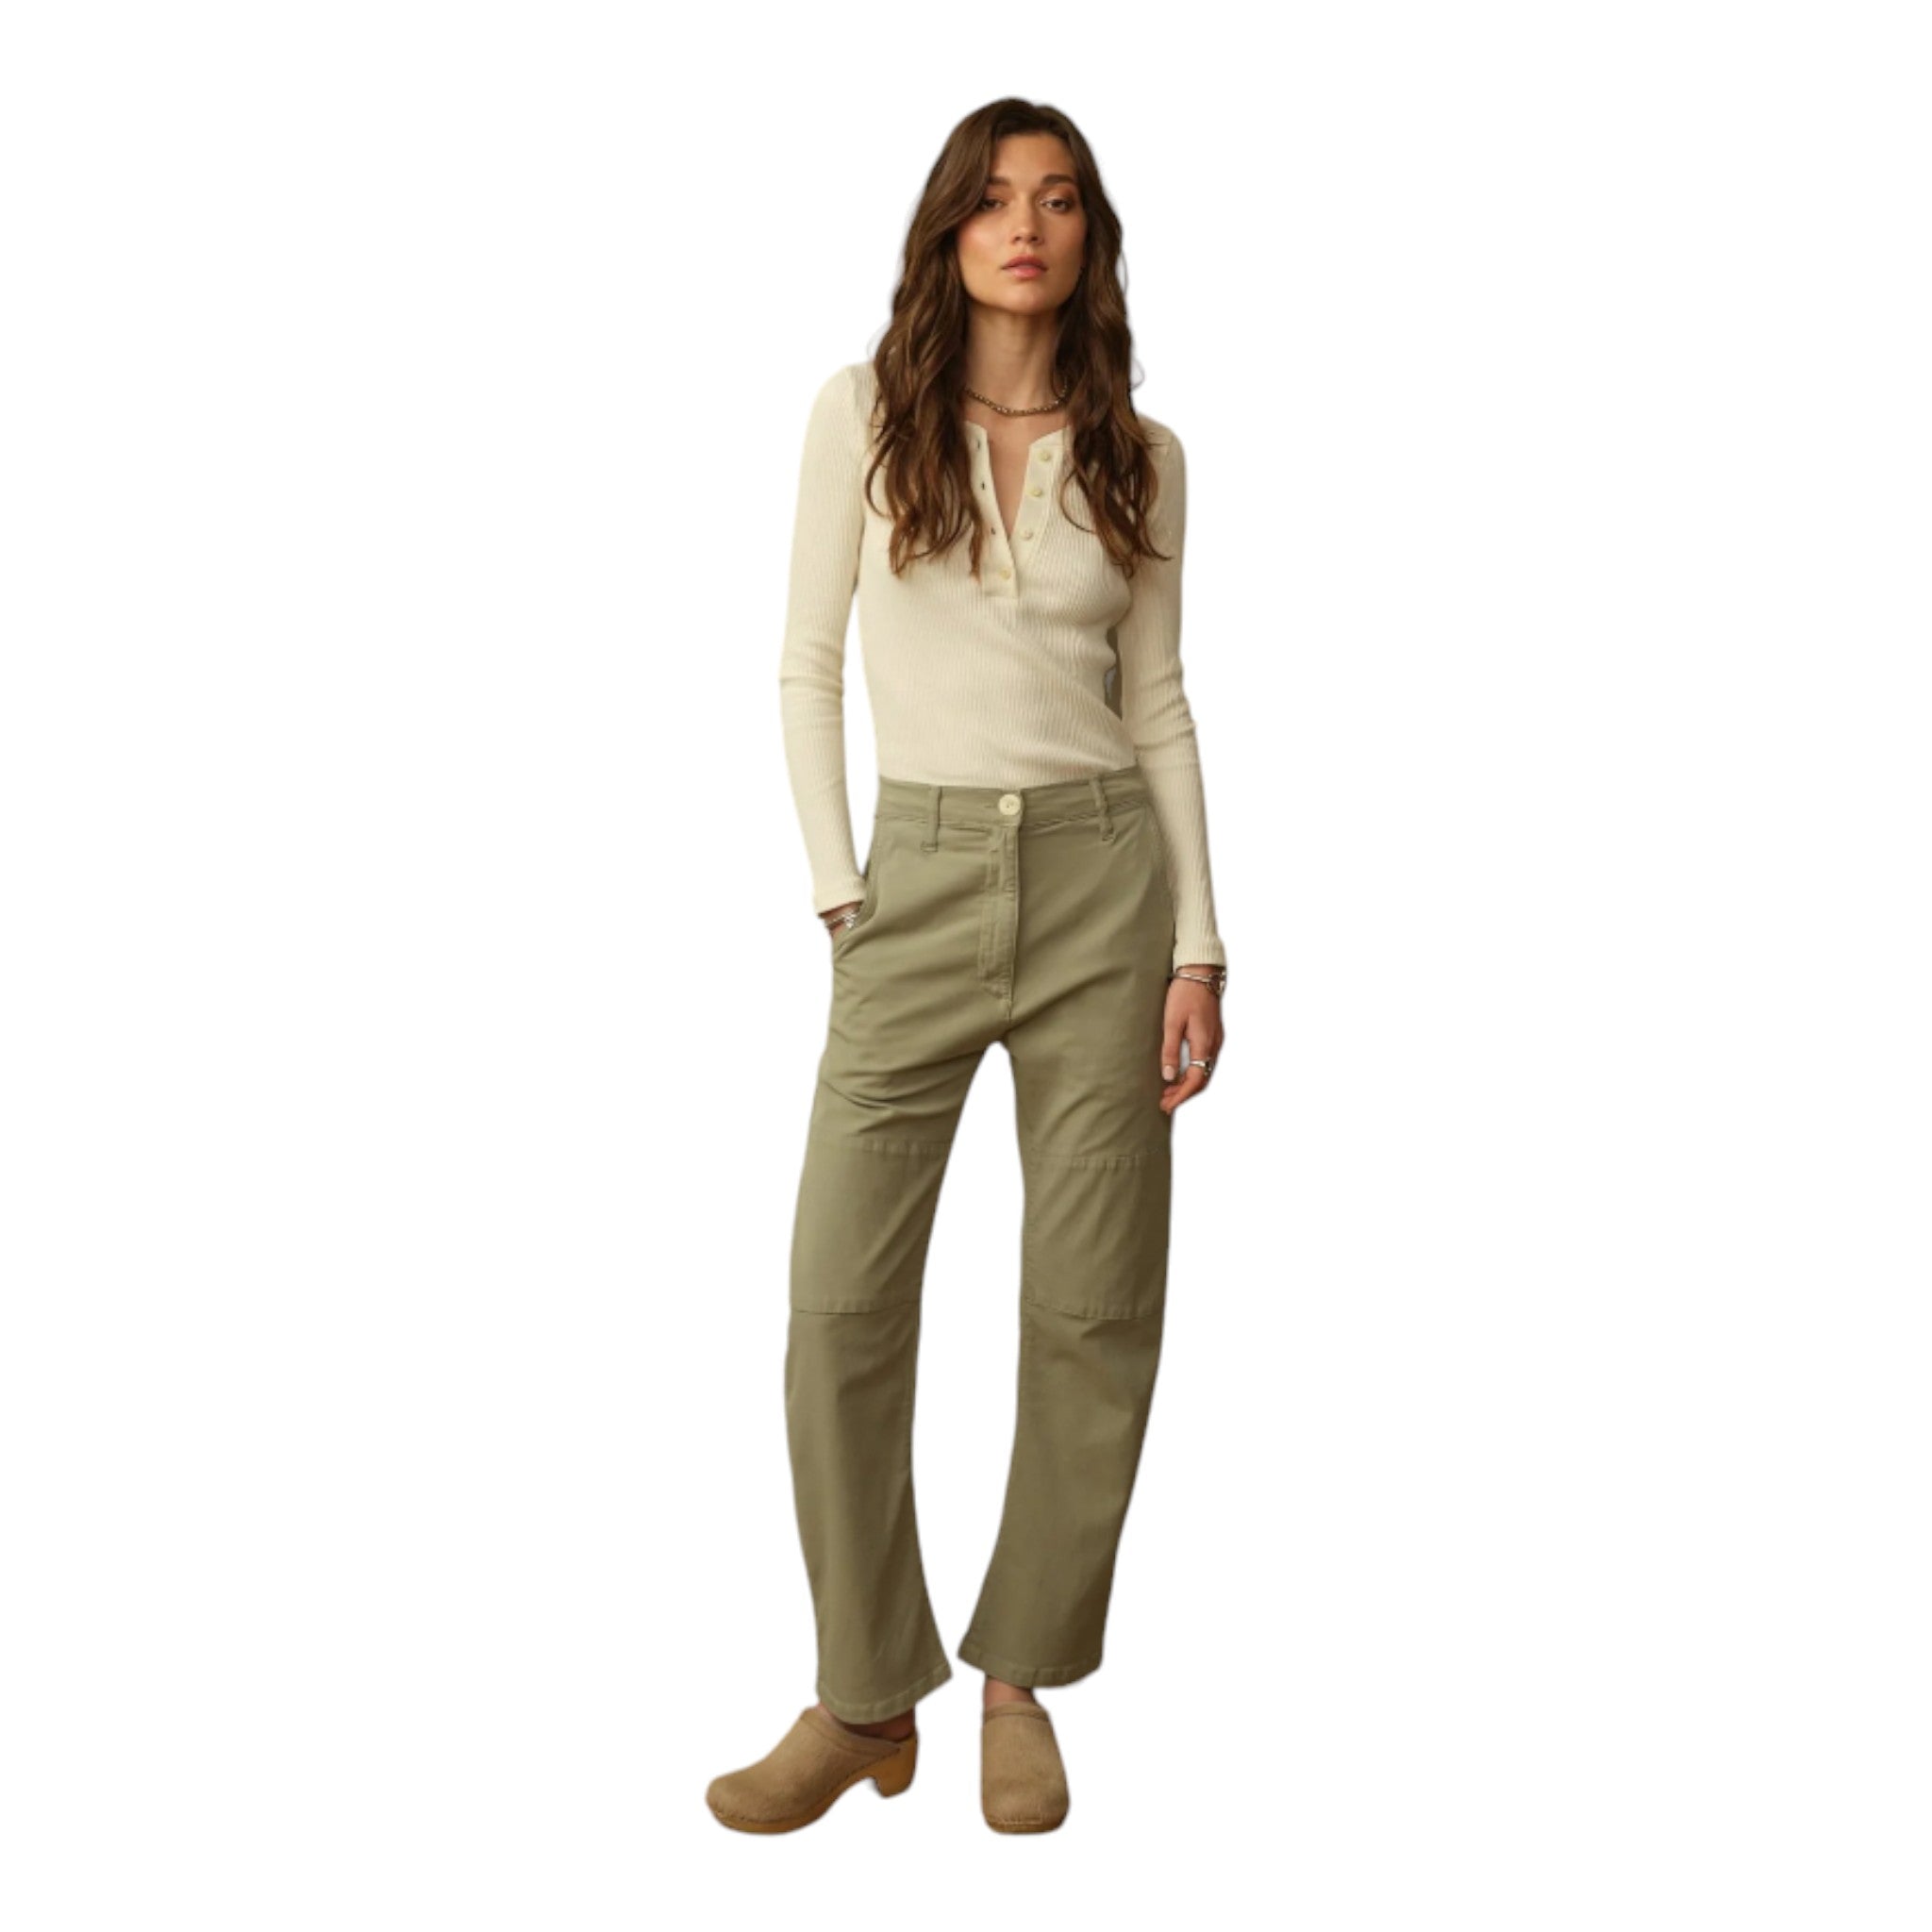 khaki green pant featuring a button and zip closure, belt loops, slant pockets in the front and patch pockets in the back